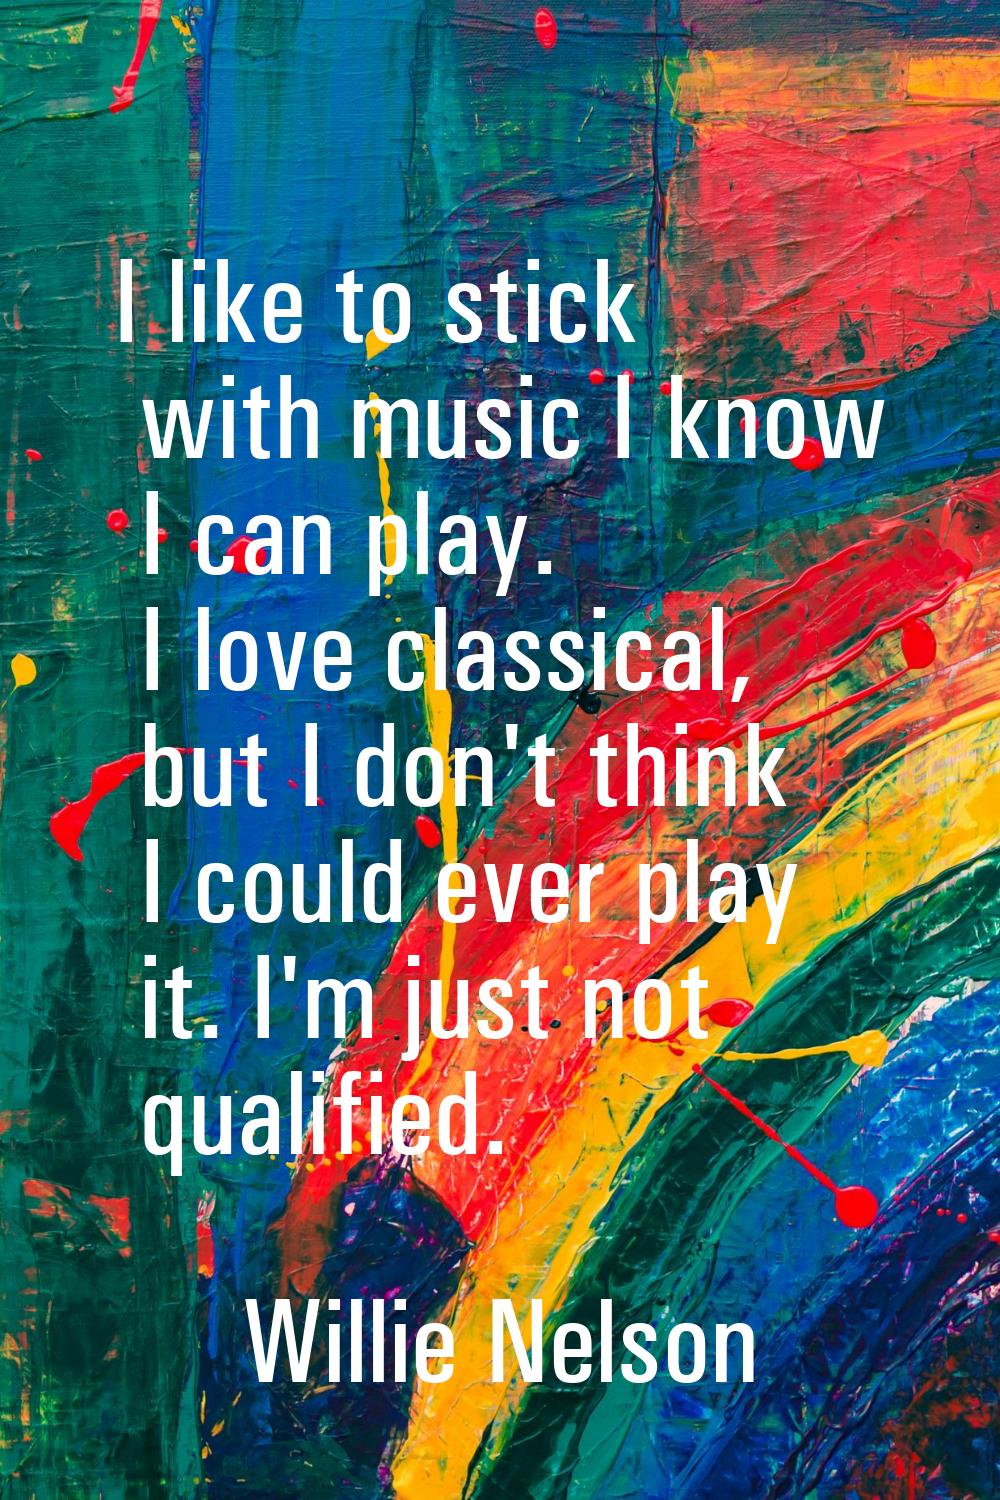 I like to stick with music I know I can play. I love classical, but I don't think I could ever play